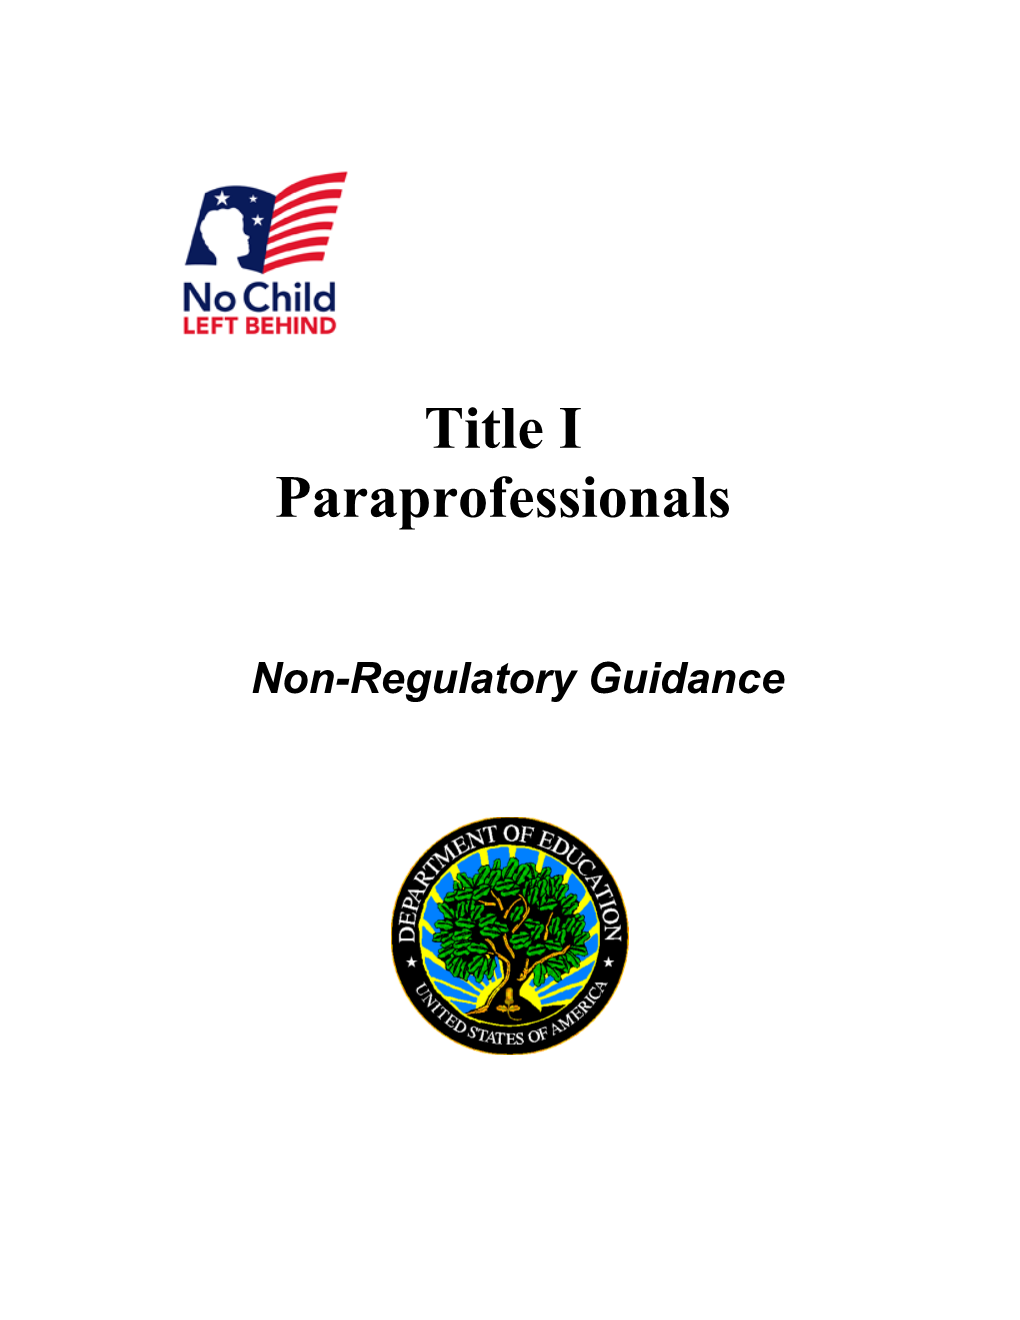 Title I Non-Regulatory Paraprofessionals Guidance March 1, 2004 (MS WORD)